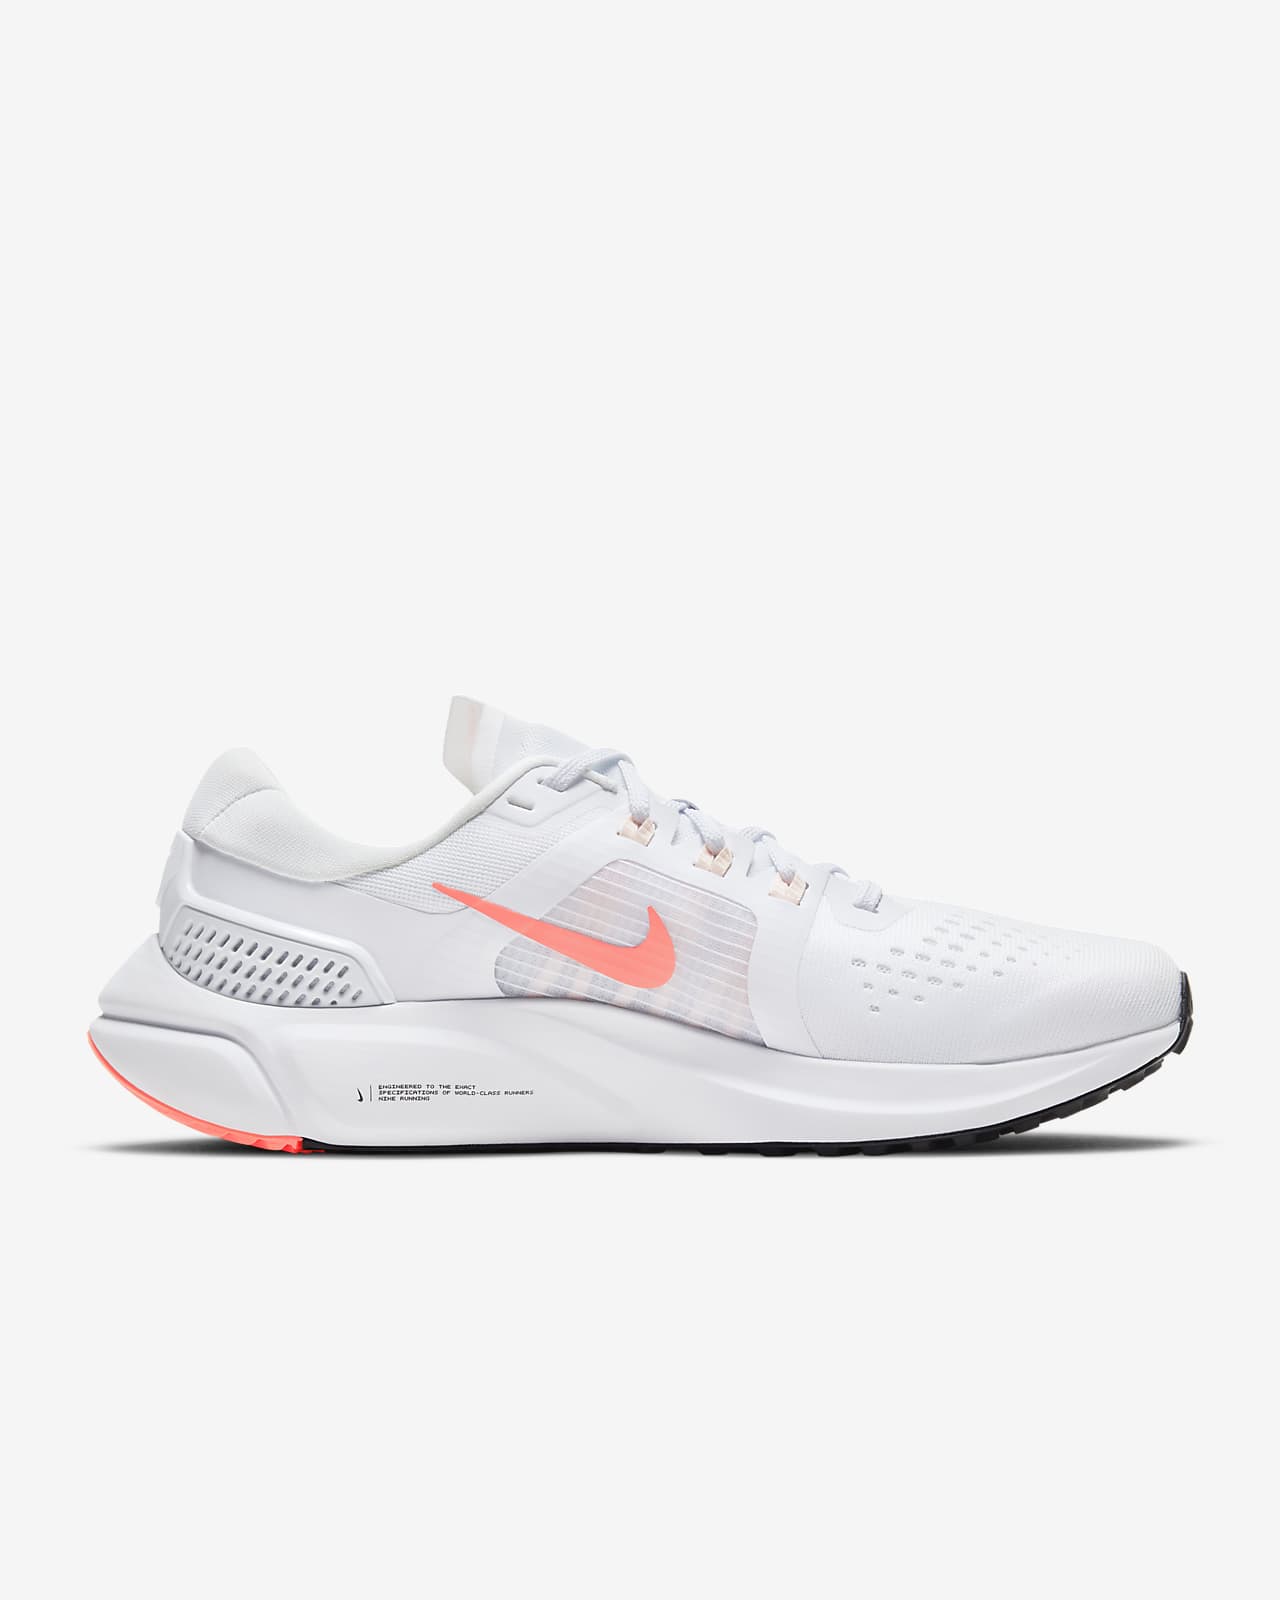 nike zoom structure 15 women's